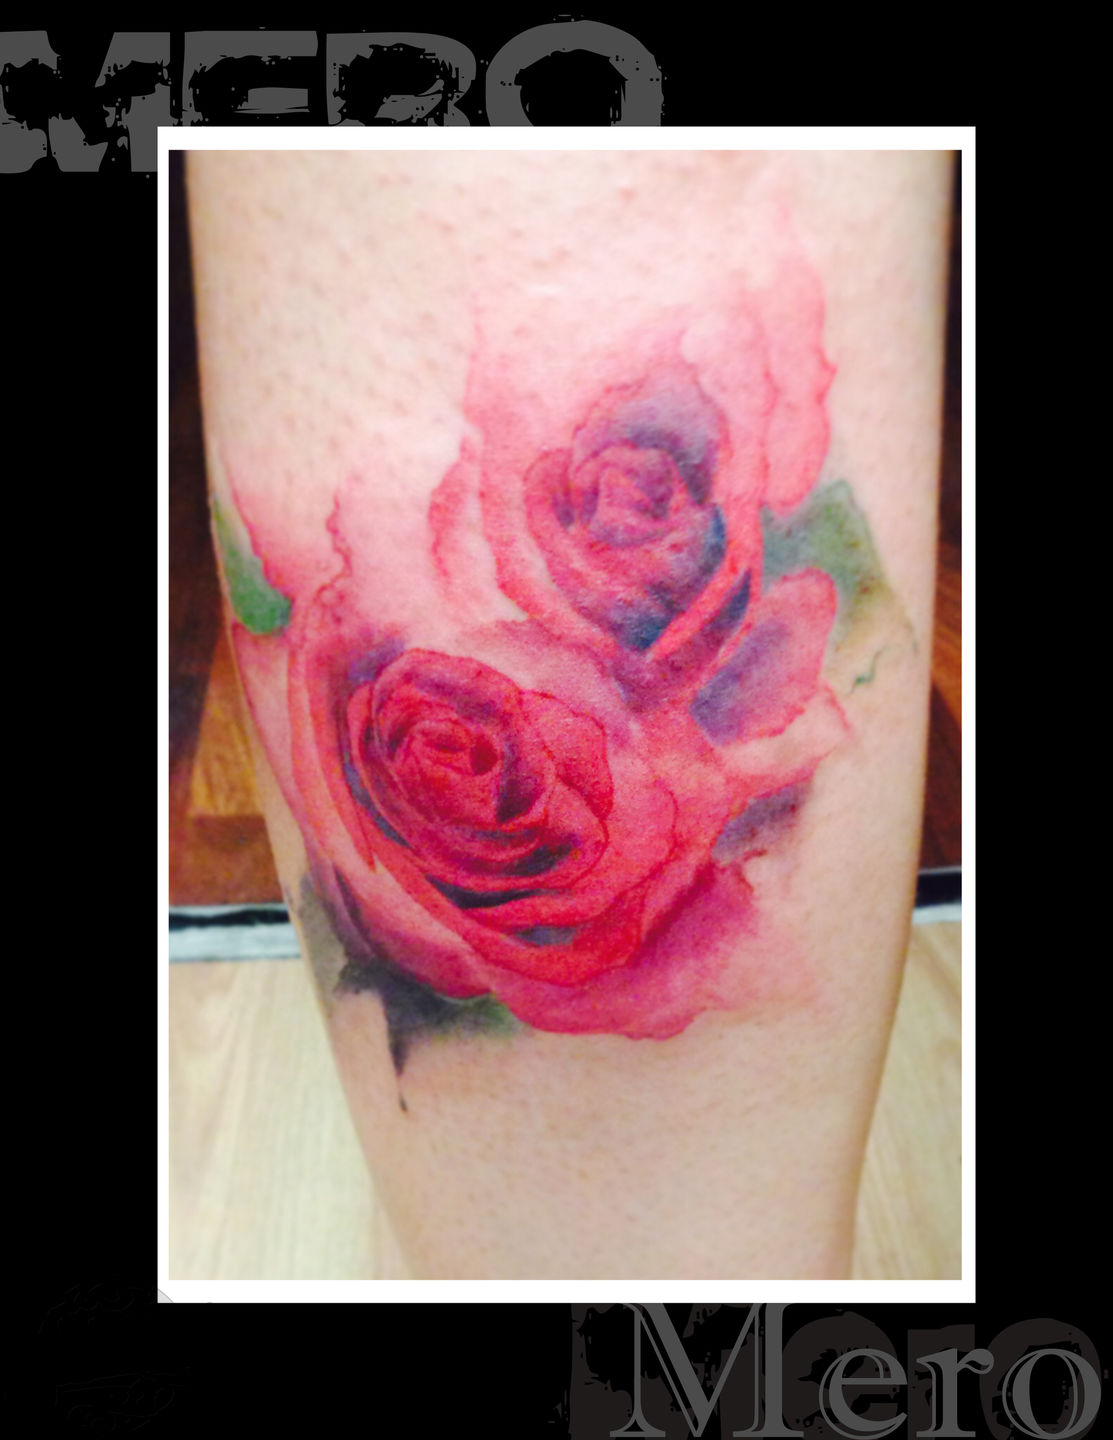 Rose tattoos: meaning & rose tattoo ideas